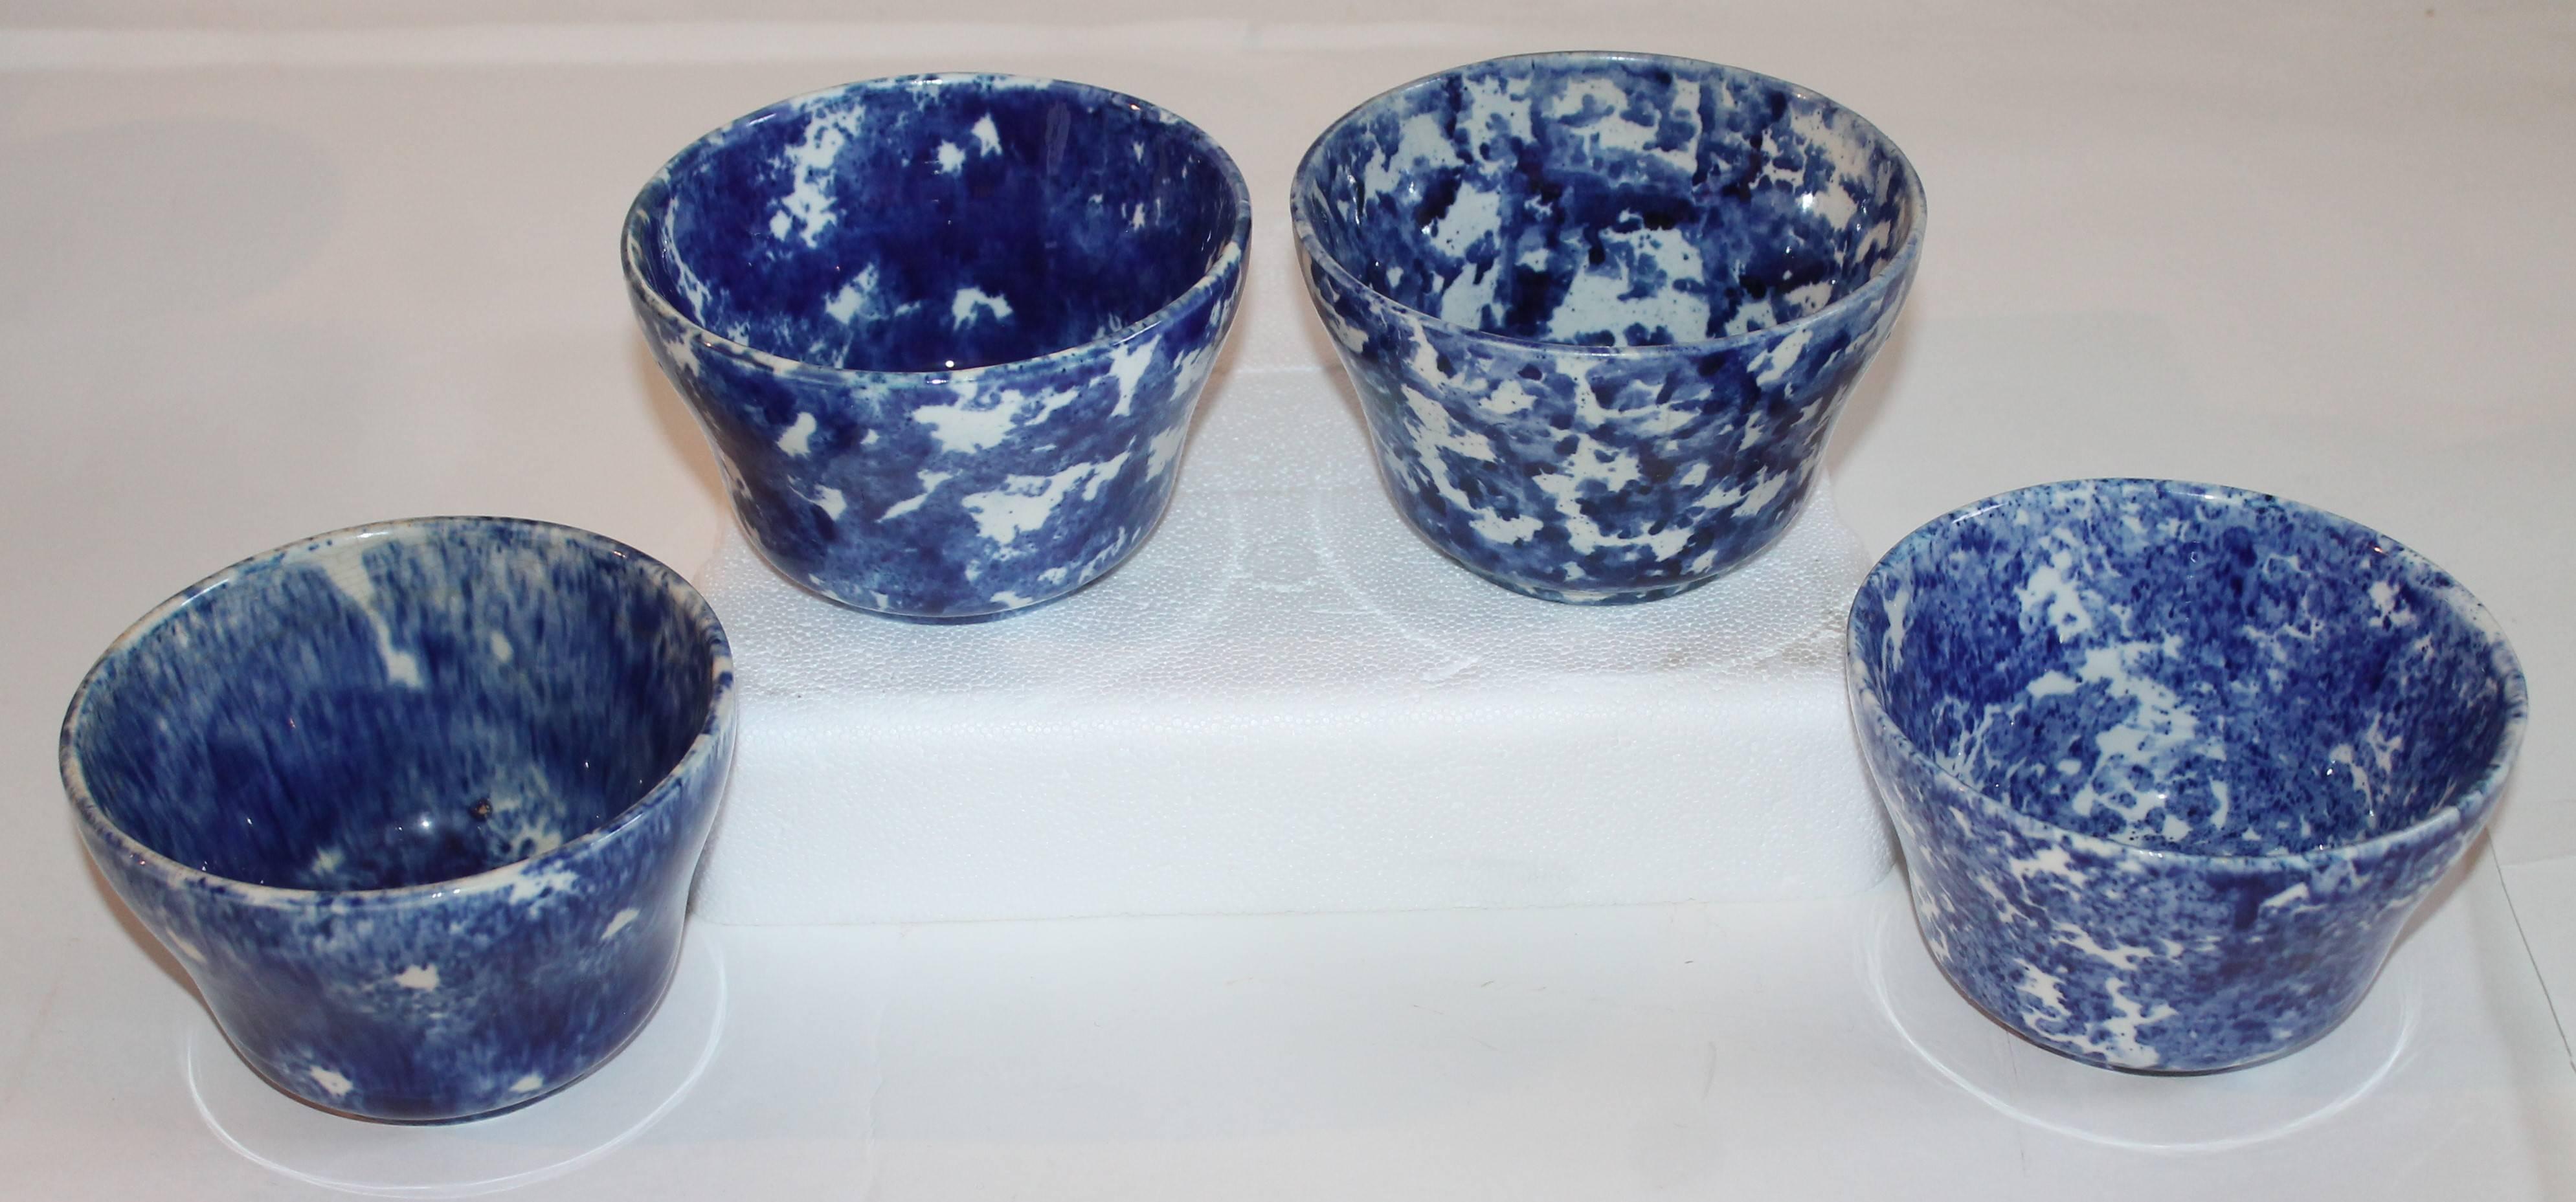 These amazing 19th century sponge ware bowls are all in pristine condition and have various different shades of blue pattern. They are original called a waste bowl; however in today's world they would make great cereal bowls. Great to mix and match.